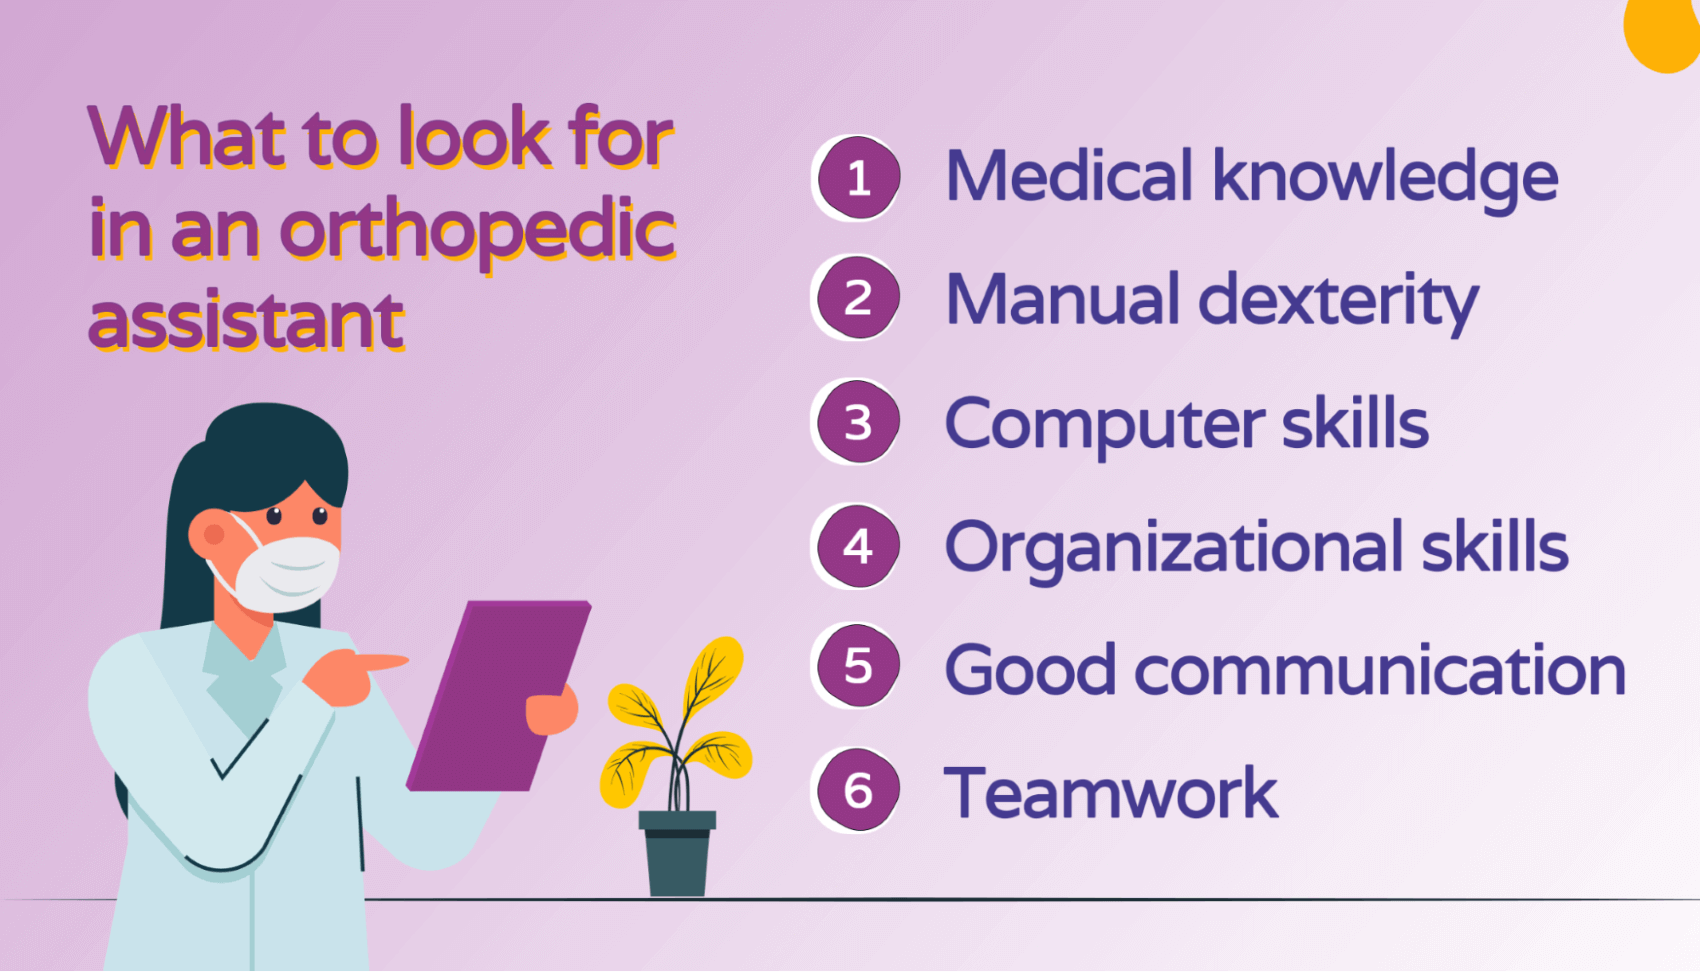 What skills does an orthopedic assistant need